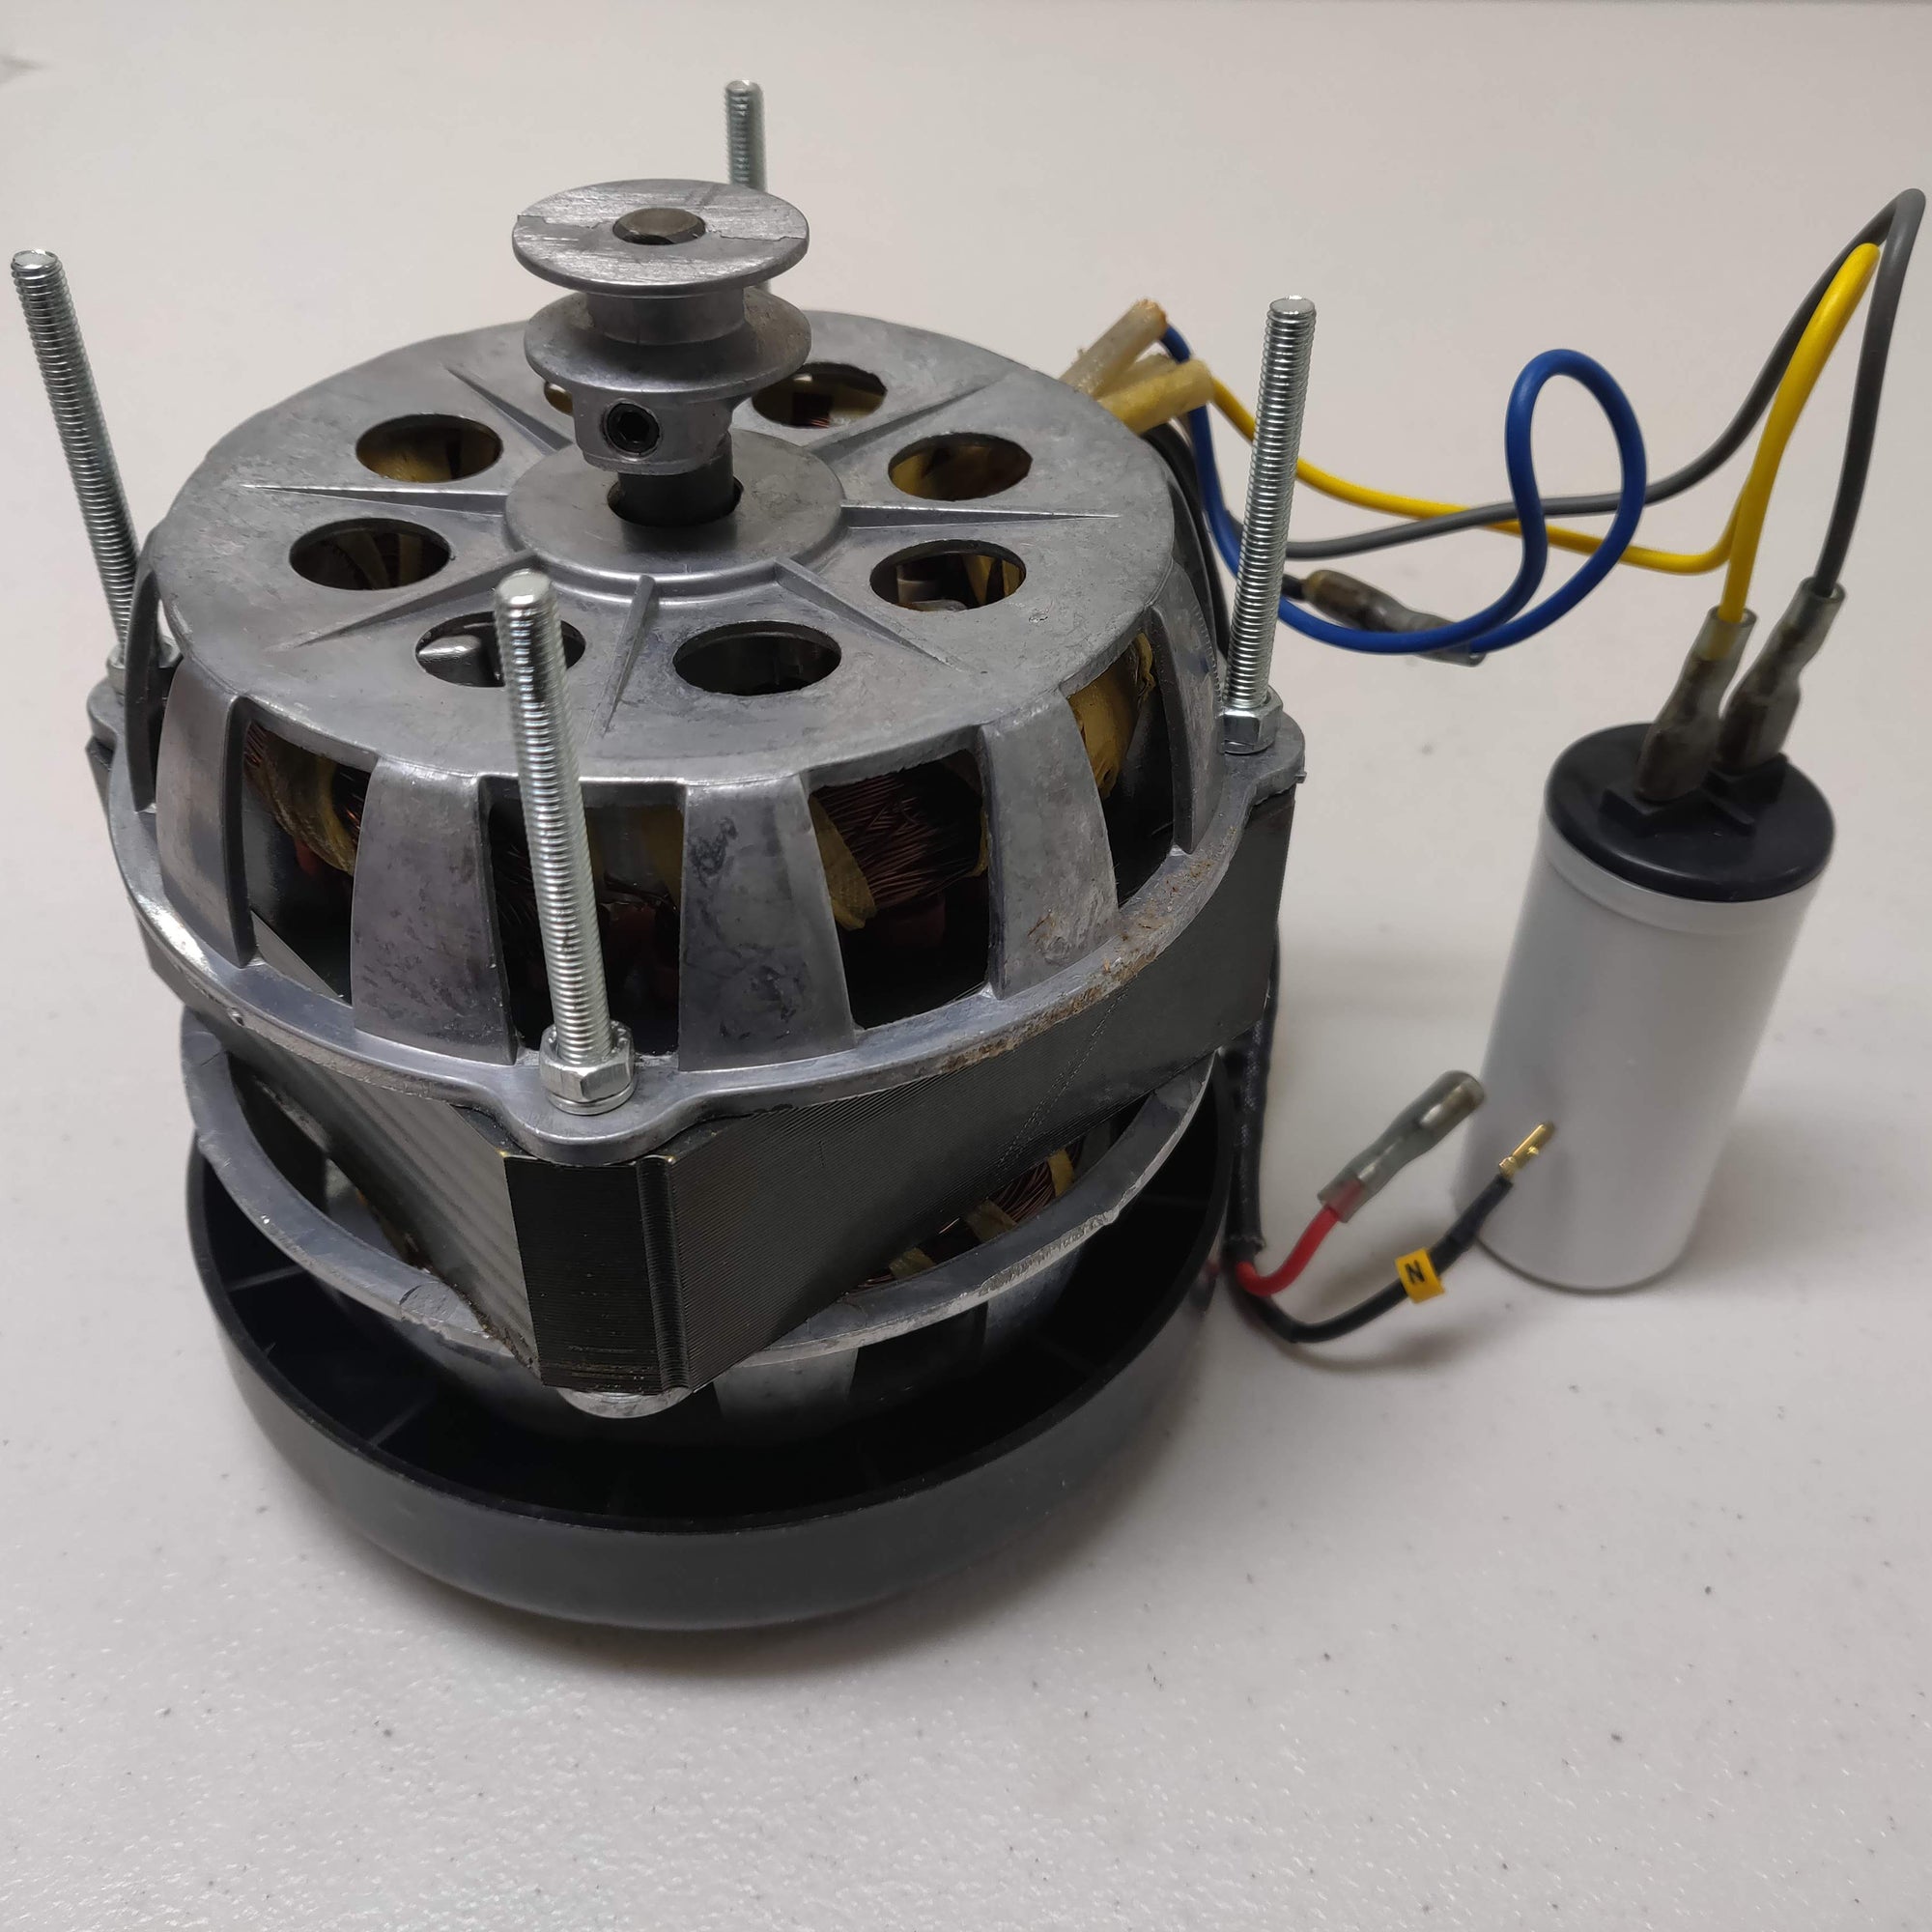 Original Electric Motor with built in Temperature Safety Switch